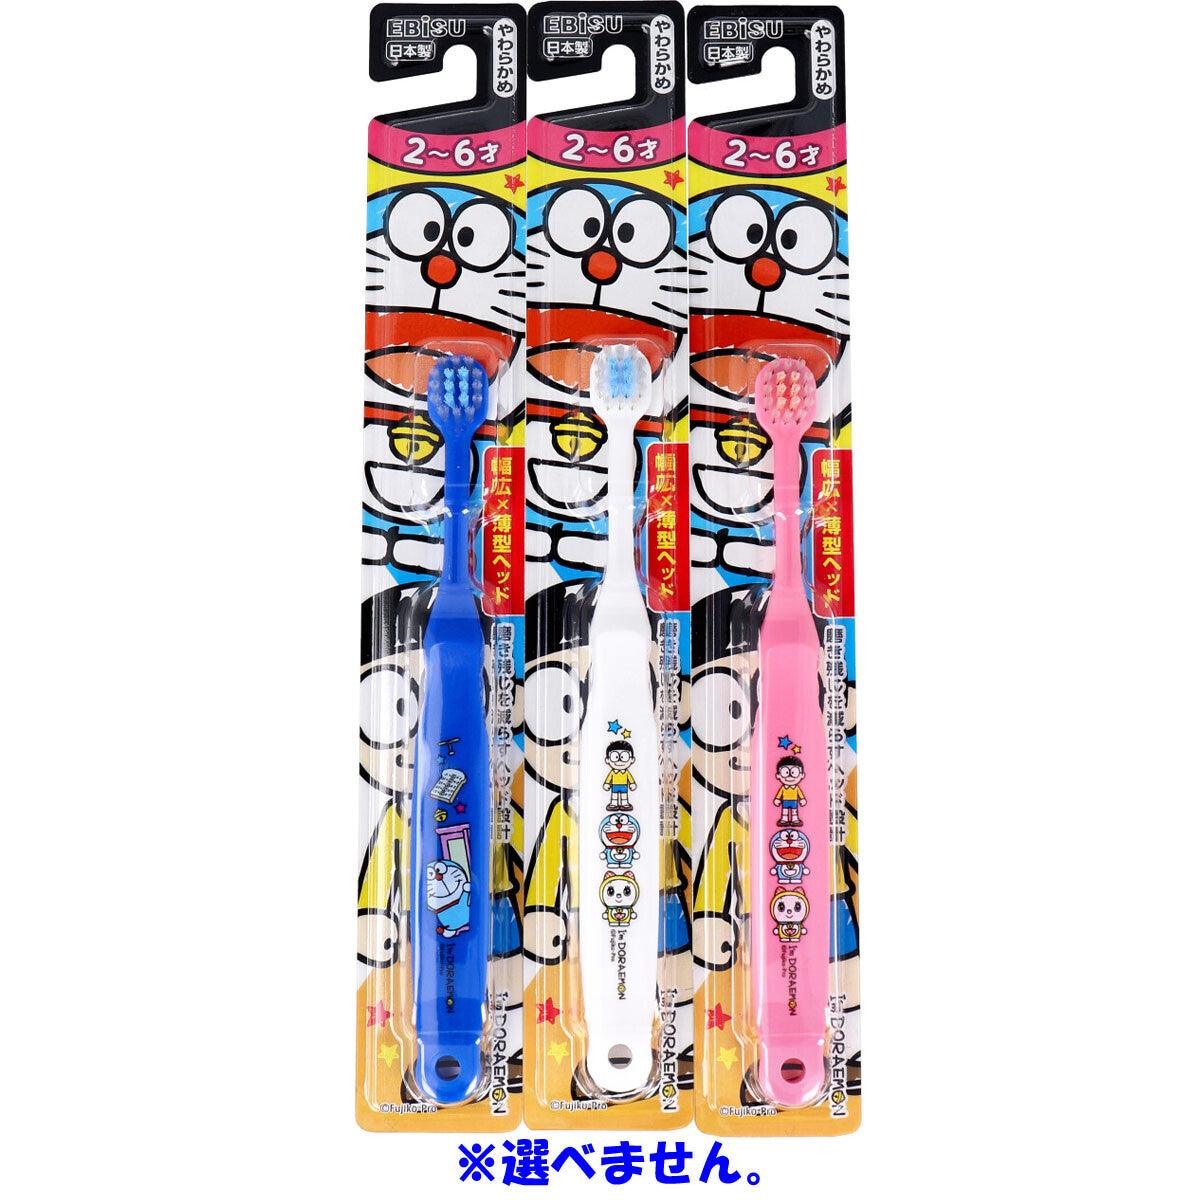 Buy [6-PACK] EBISU Doraemon children's wide-head toothbrush 2 years old to 6 years old discounted | Products On Sale Australia